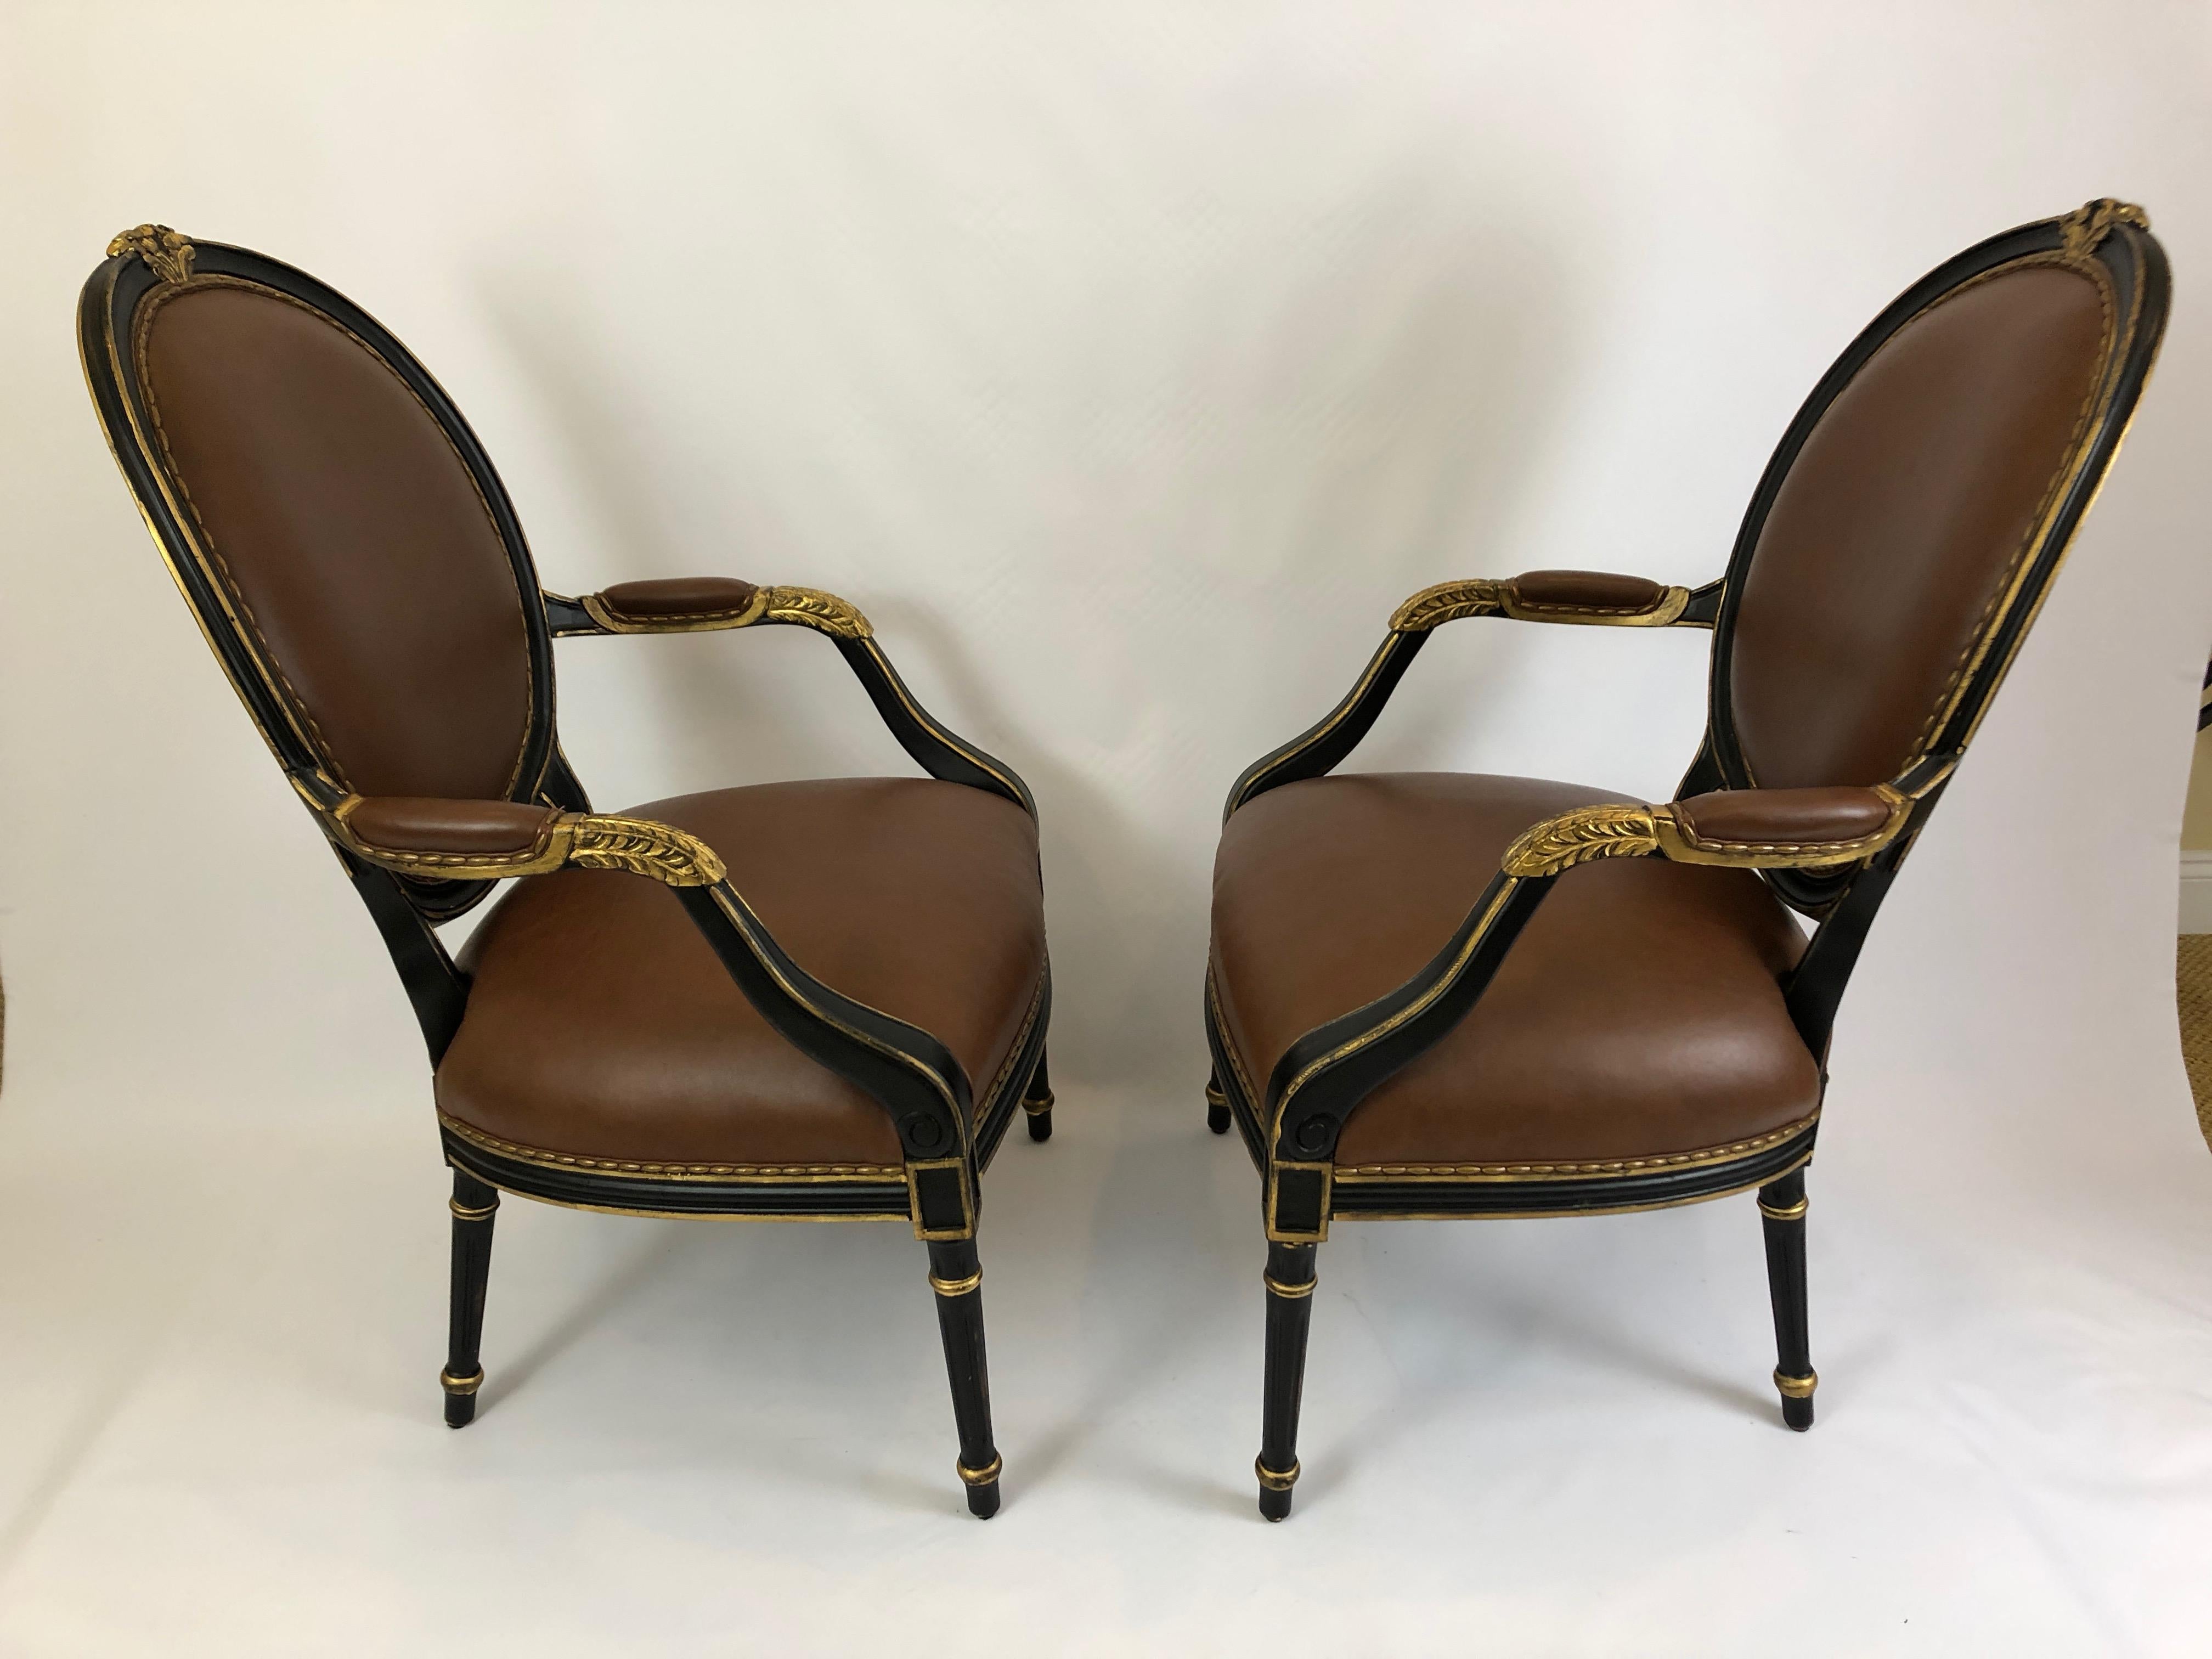 Impressive glamorous pair of roomy brown leather arm chairs having regal ebonized and gilded frames. The backs are oval shaped and beautiful front and back.
Measures: Arm height 28
Seat depth 21.